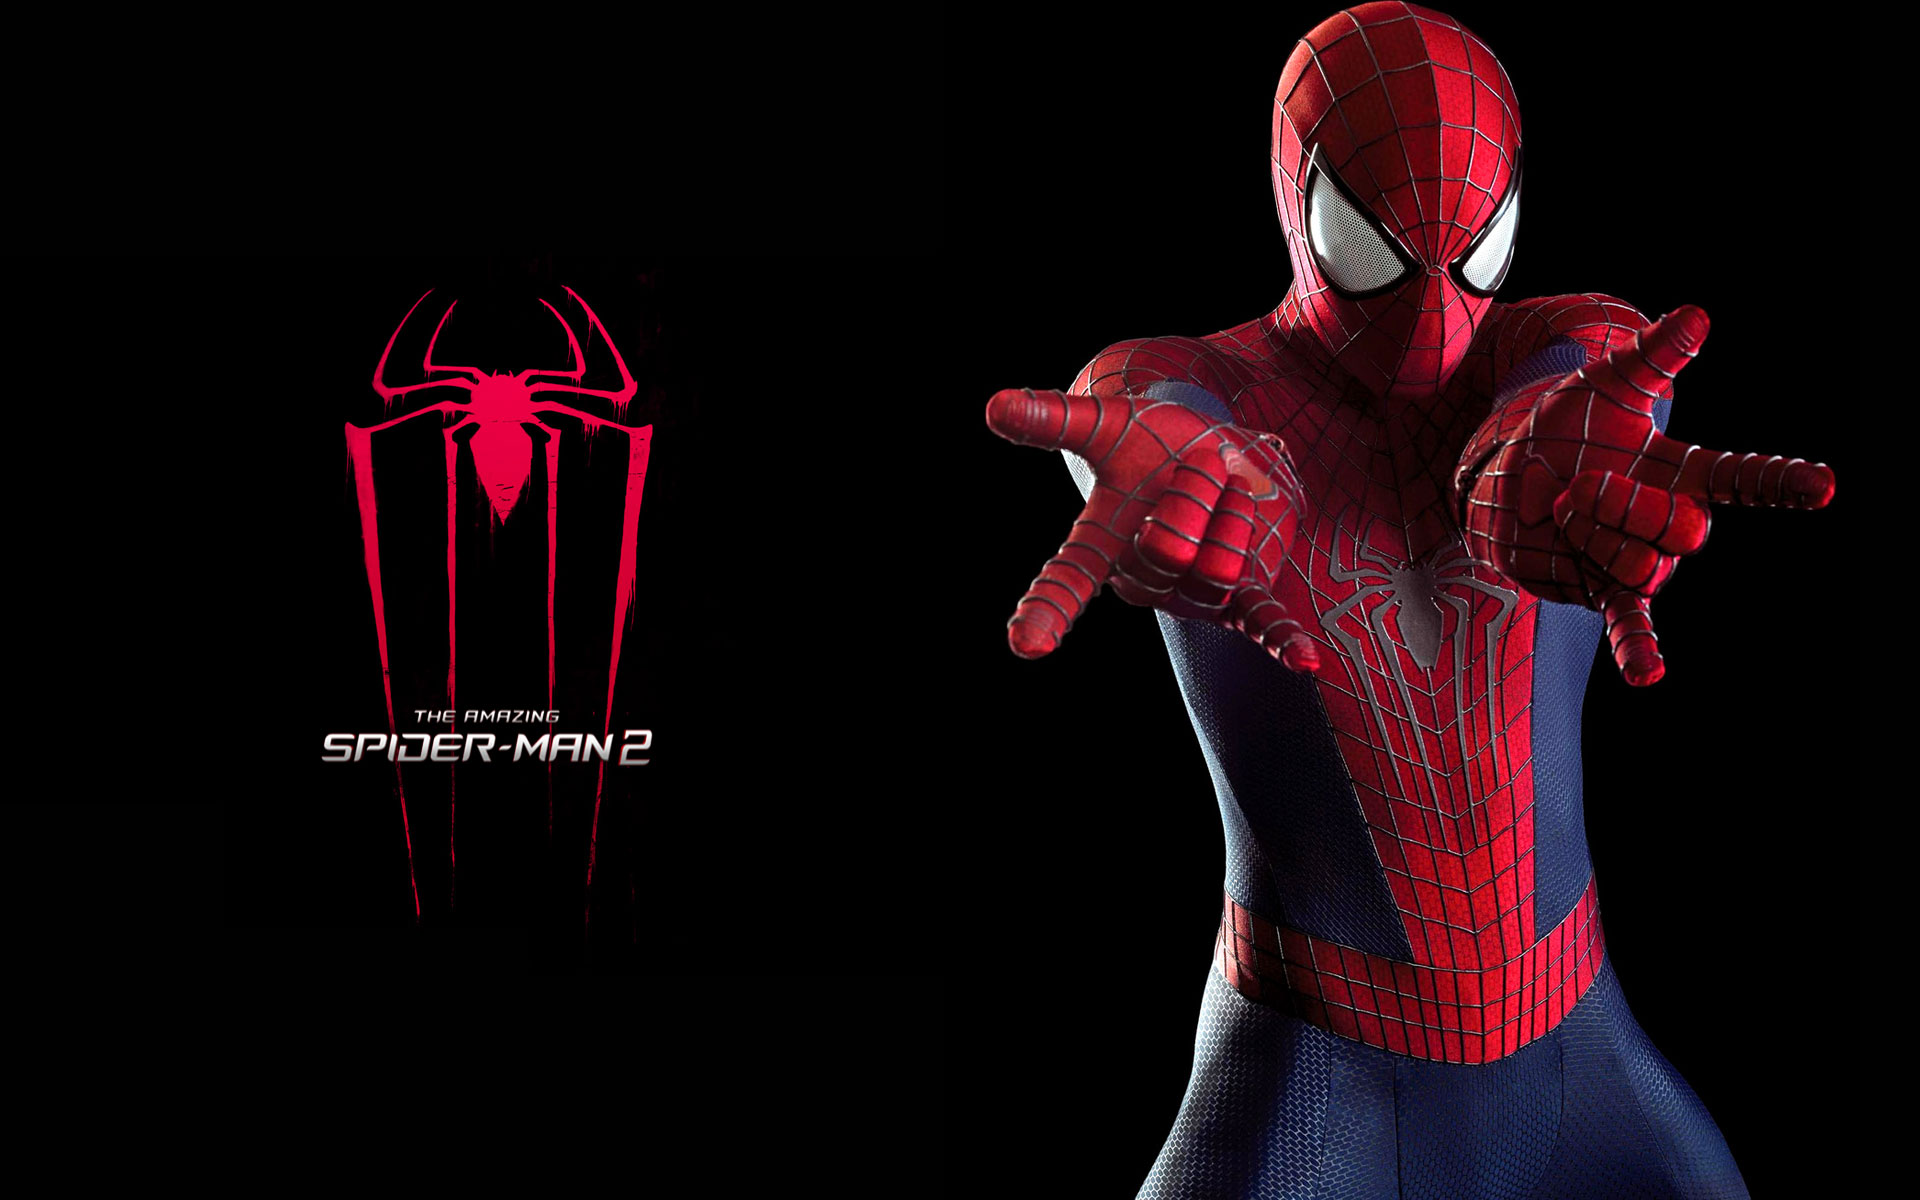 The Amazing Spider Man Wallpaper HD Amp Cover